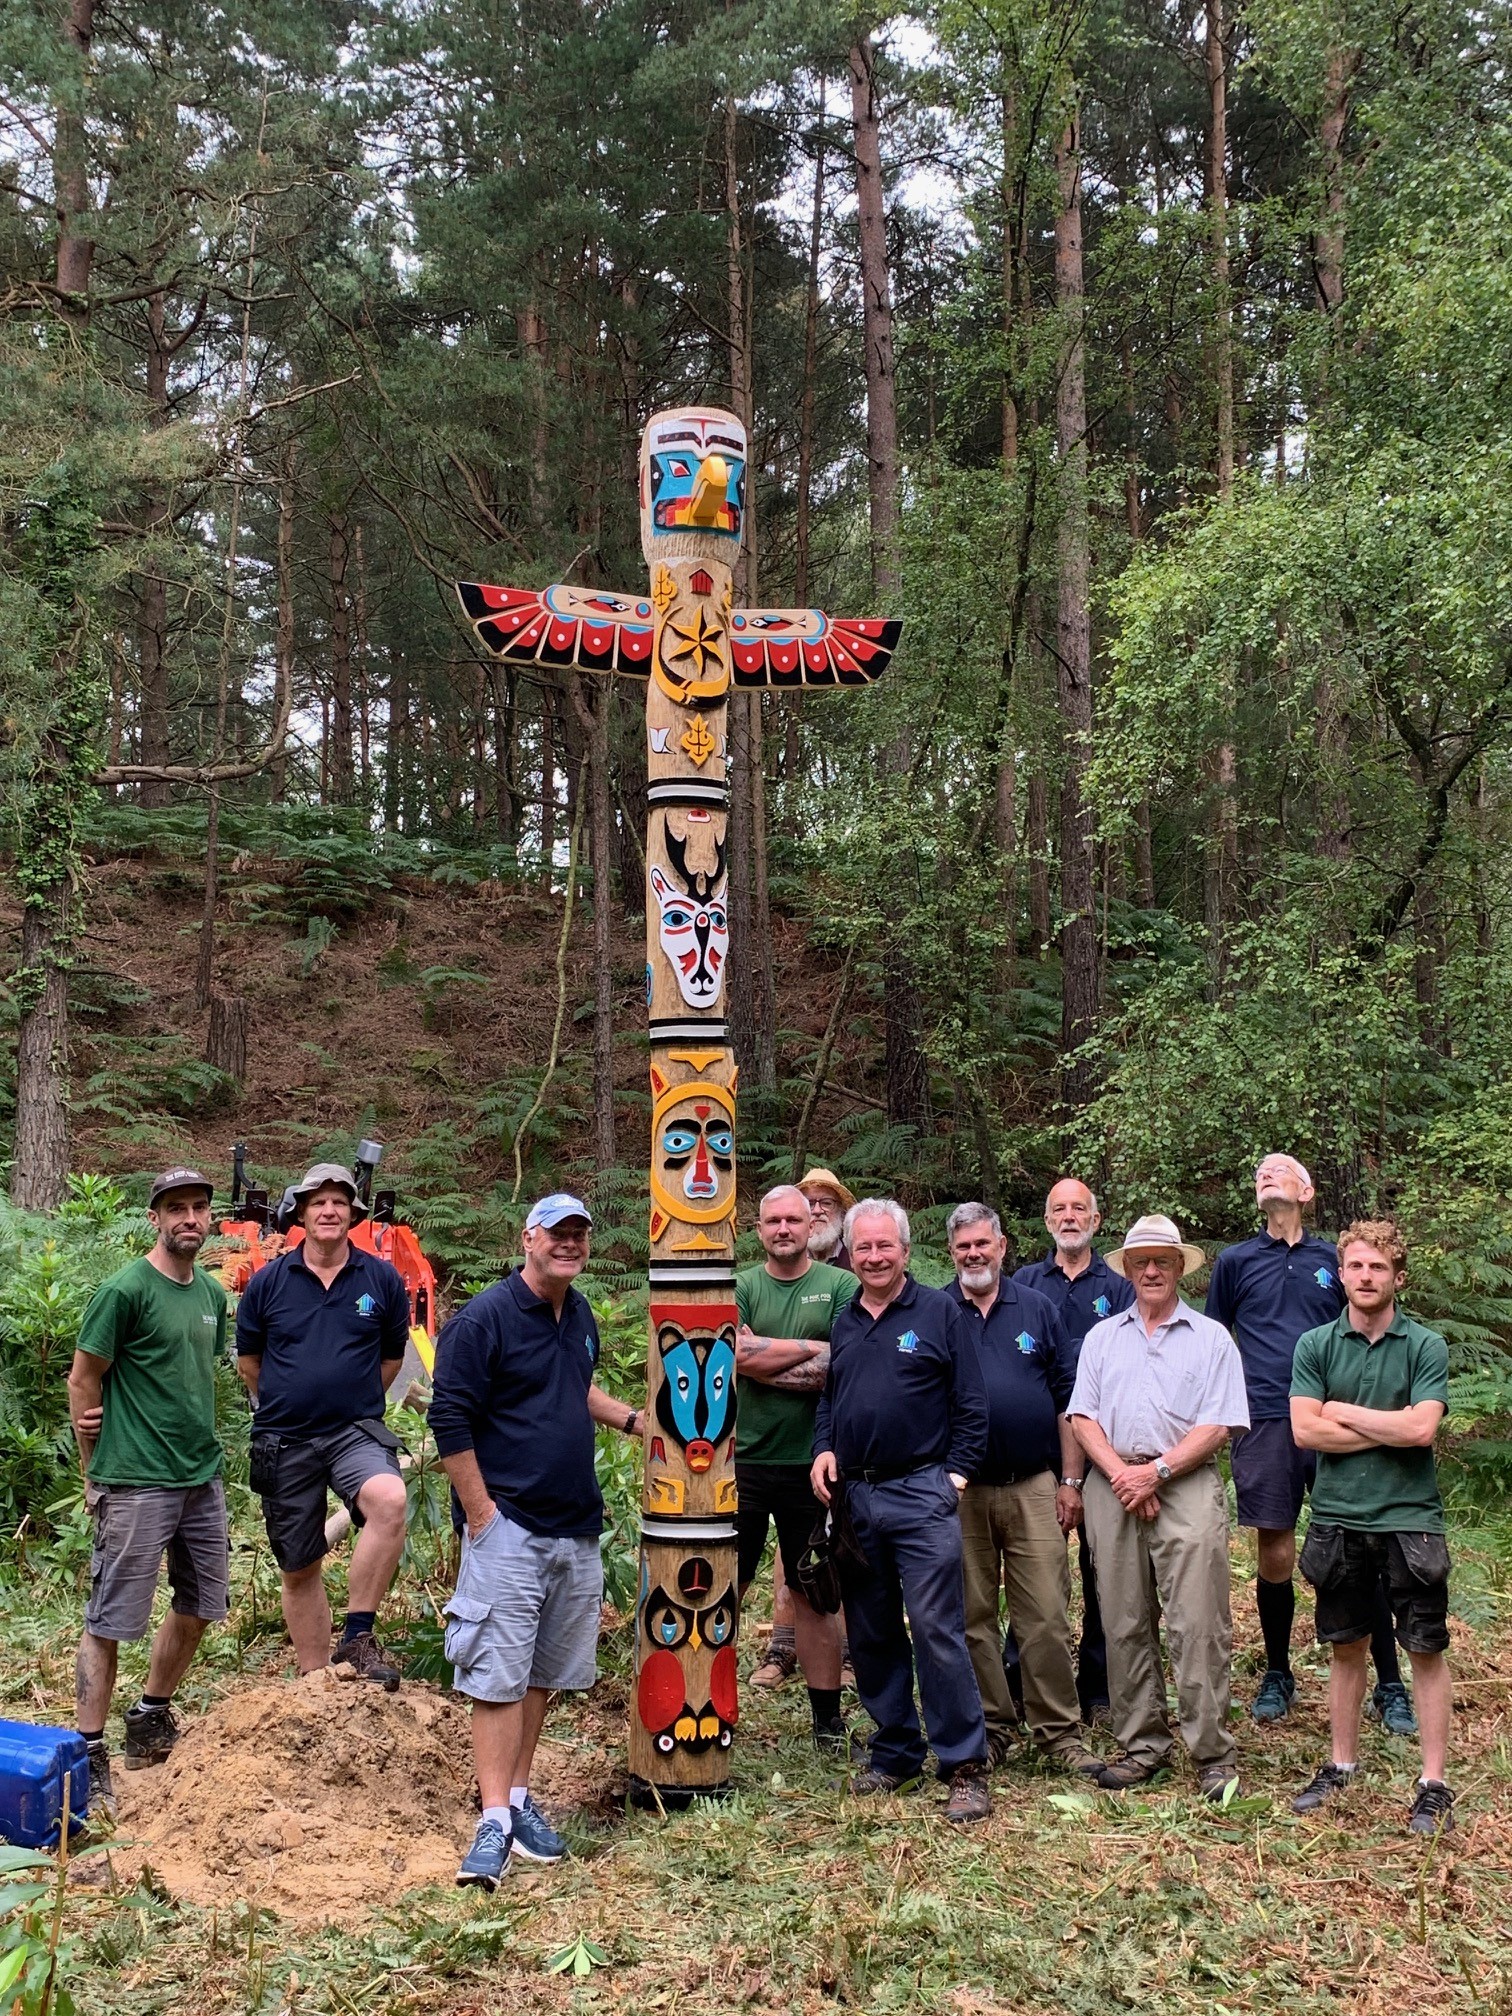 The totem pole stands proudly, surrounded by the skilled woodworkers who created it